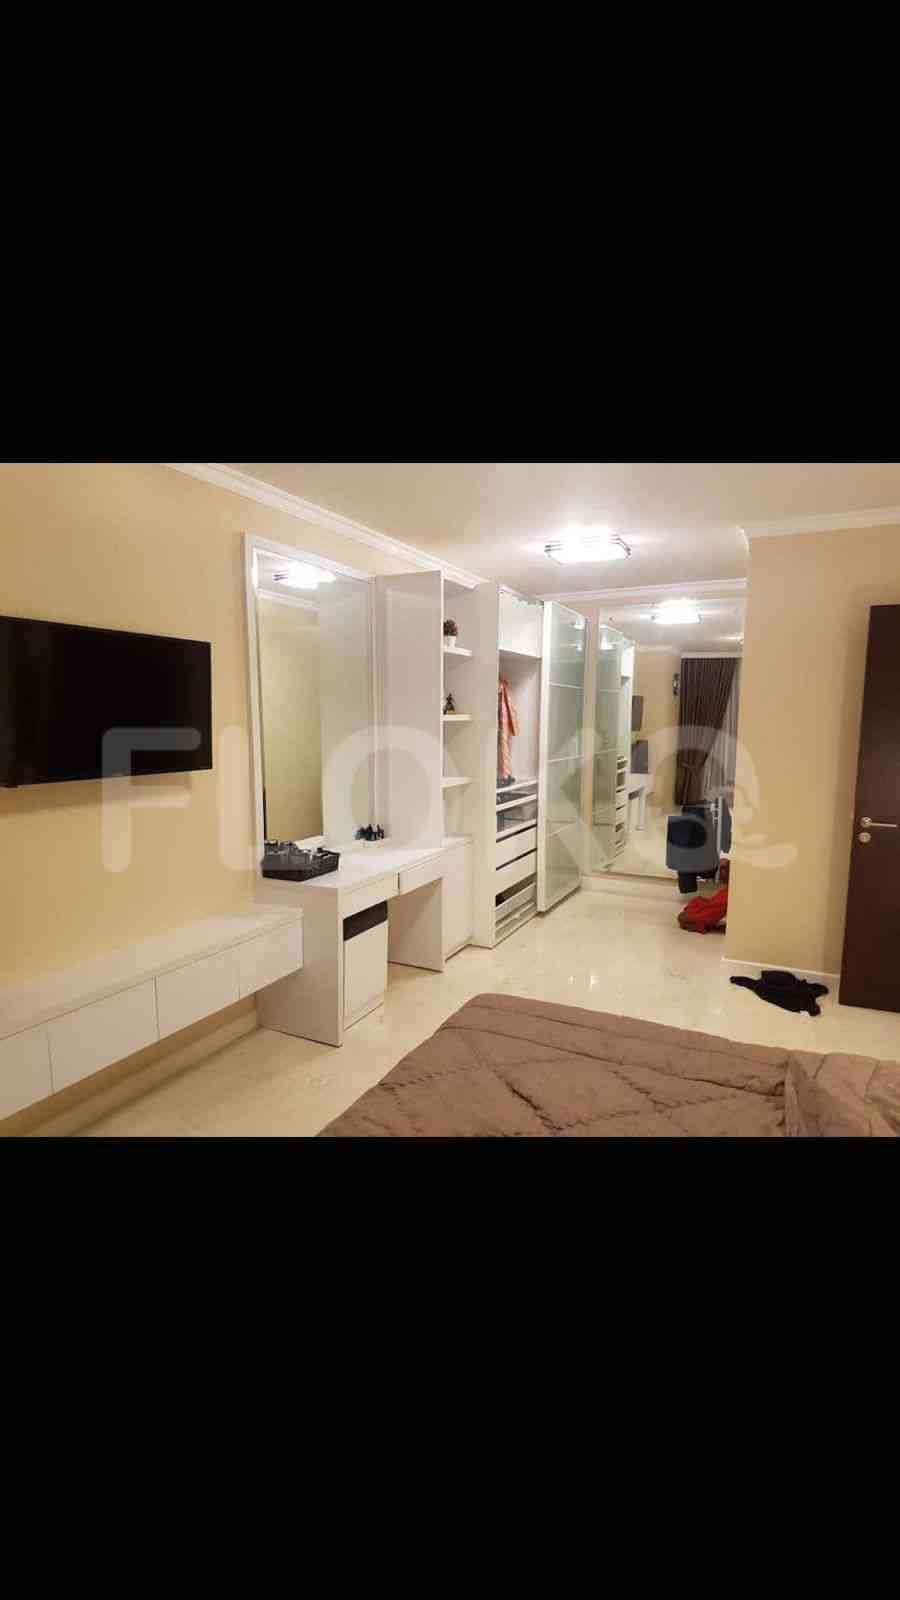 2 Bedroom on 26th Floor for Rent in Lavanue Apartment - fpafa4 6